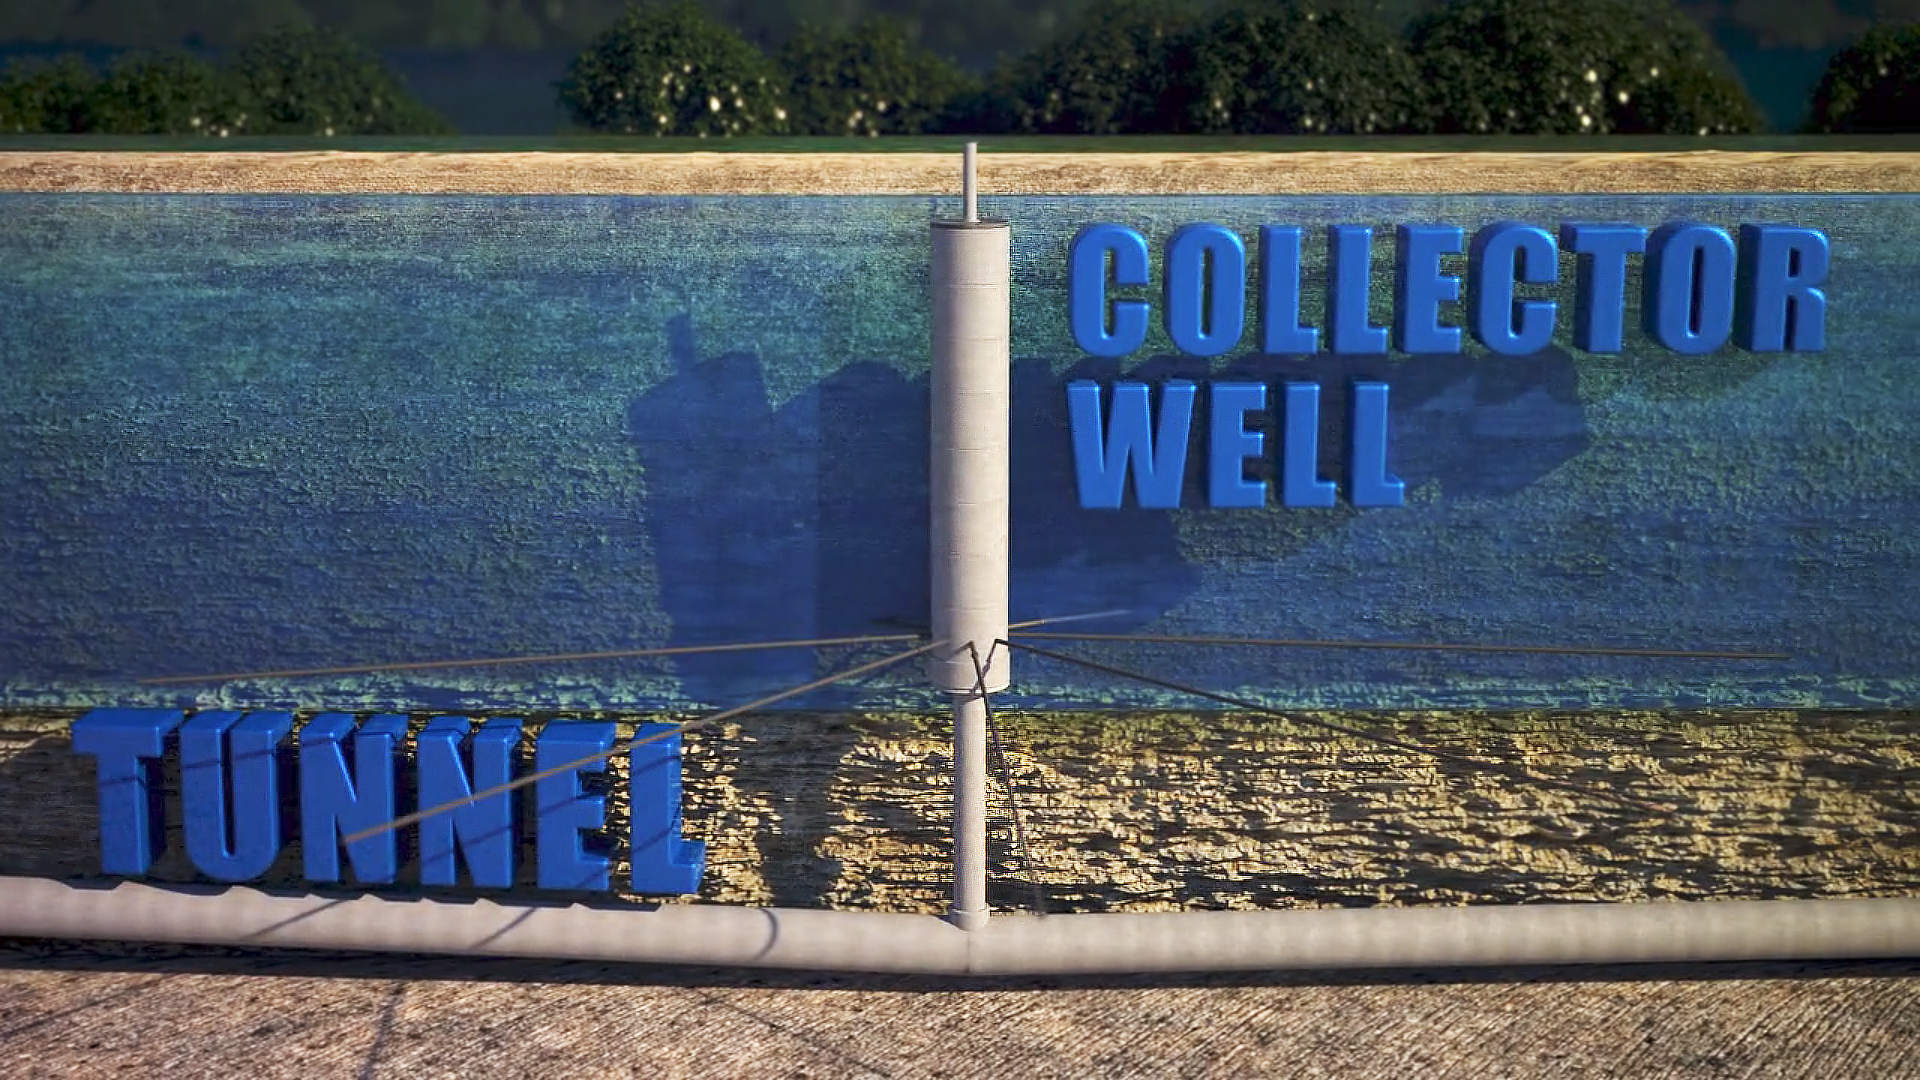 This is a 3D rendered image from the informational animation documenting the Ohio Riverank filtration system. This image displays an underground view of the collector wells and tunnels in action, accompanied by 3D words on each side of the image, labeling the components.